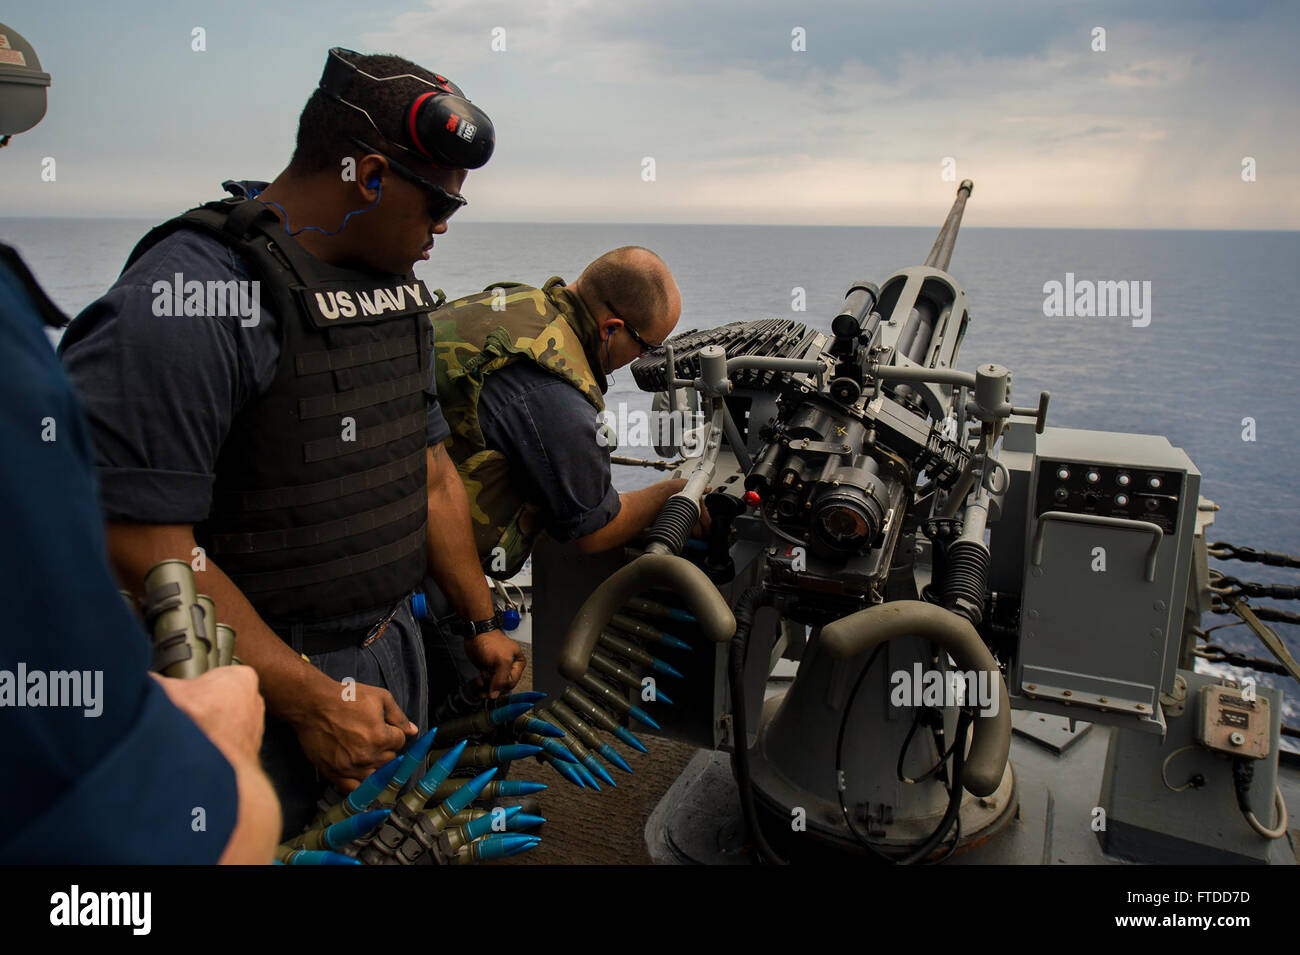 150606-N-FQ994-083 MEDITERRANEAN SEA (June 6, 2015) Gunner's Mate 3rd Class Alex Scott, from Blue Bell, Pennsylvania, left, and Sonar Technician (Geographical) 2nd Class Stephen Burnett, from Spartanburg, South Carolina, reload the Mark34 25 mm chaingun aboard USS Ross (DDG 71) during a crew served weapons shooting exercise June 6, 2015. Ross, an Arleigh Burke-class guided-missile destroyer USS Ross (DDG 71), forward-deployed to Rota, Spain, is conducting naval operations in the U.S. 6th Fleet area of operations in support of U.S. national security interests in Europe.  (U.S. Navy photo by Mas Stock Photo